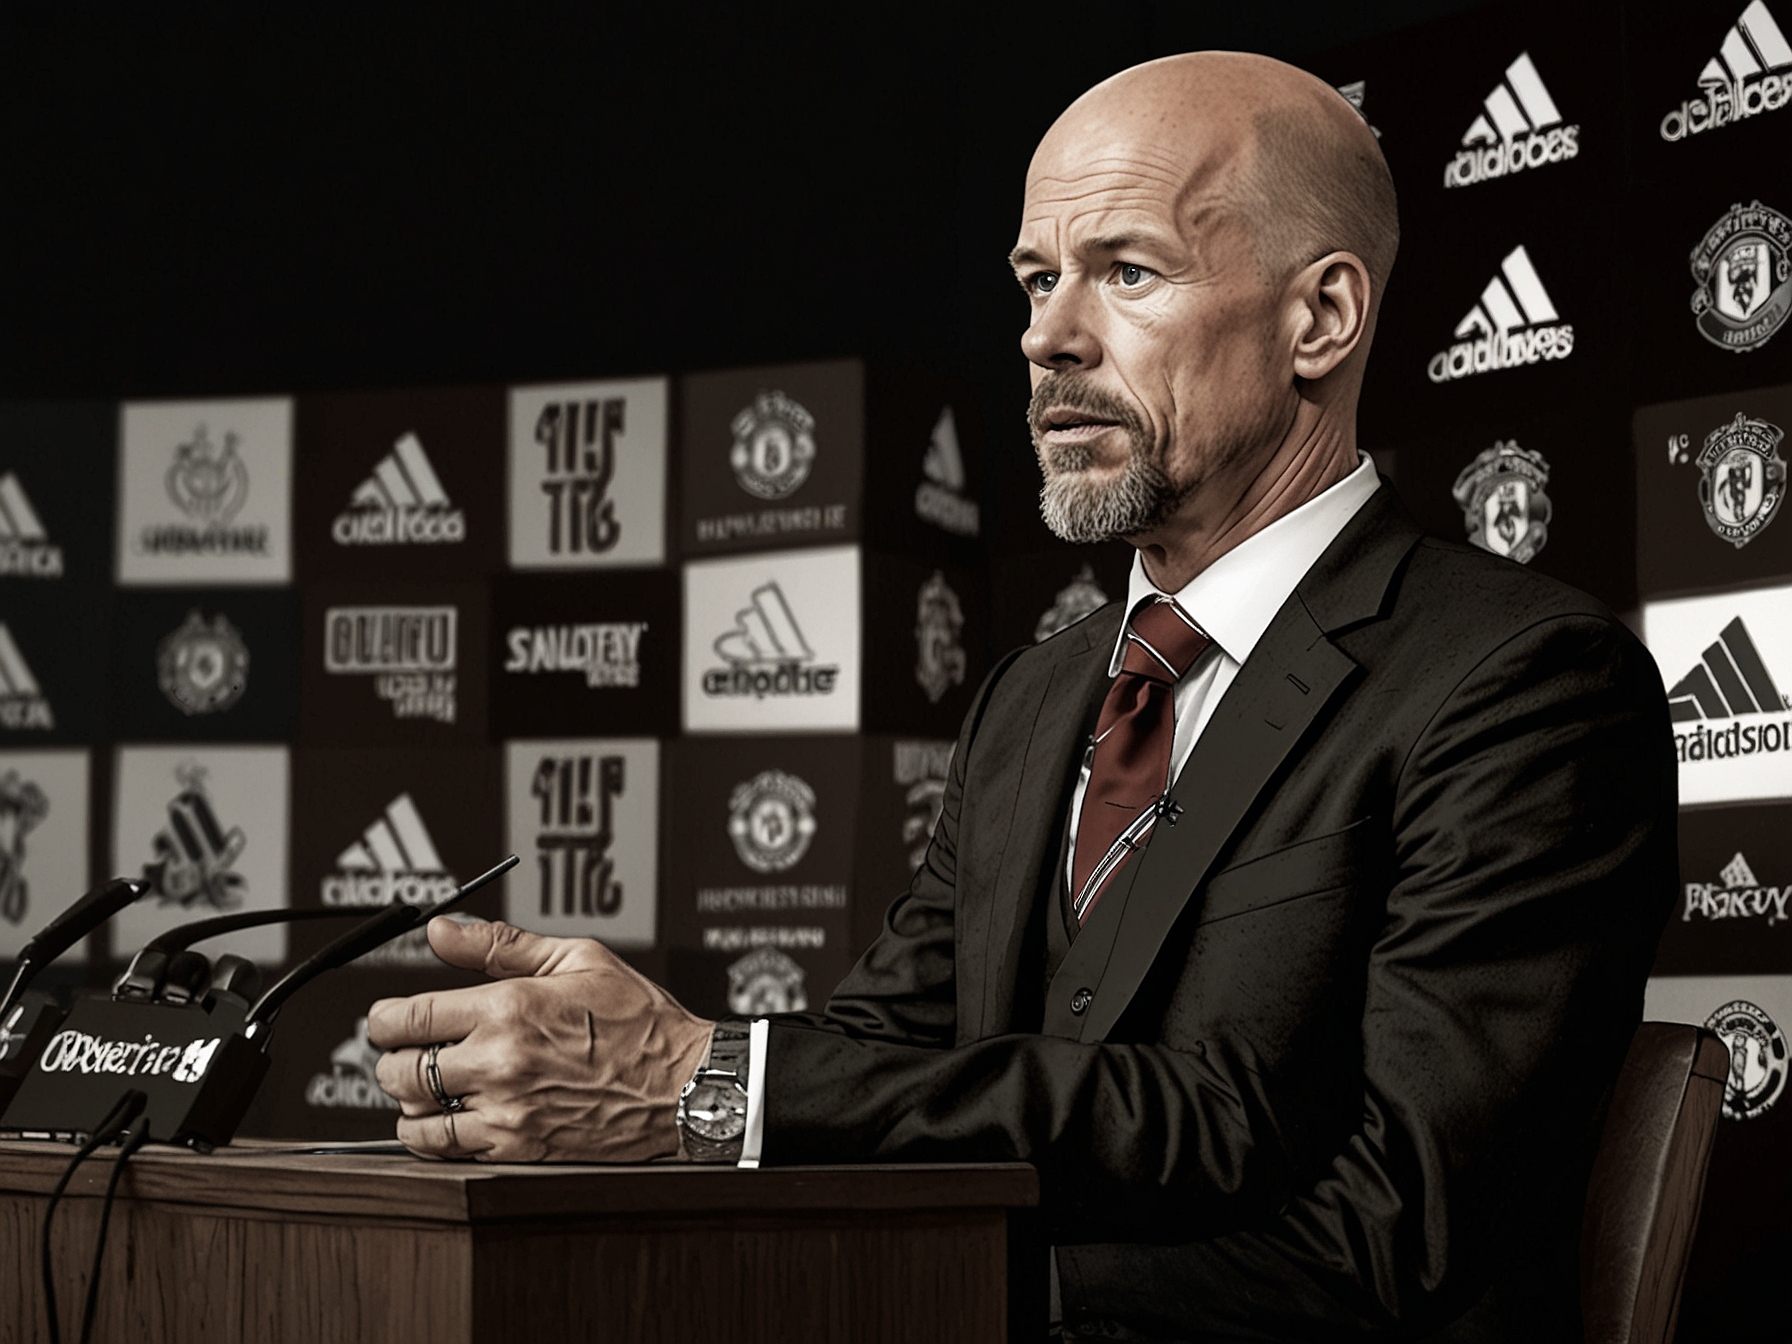 Erik ten Hag speaking at a press conference about his future at Manchester United.